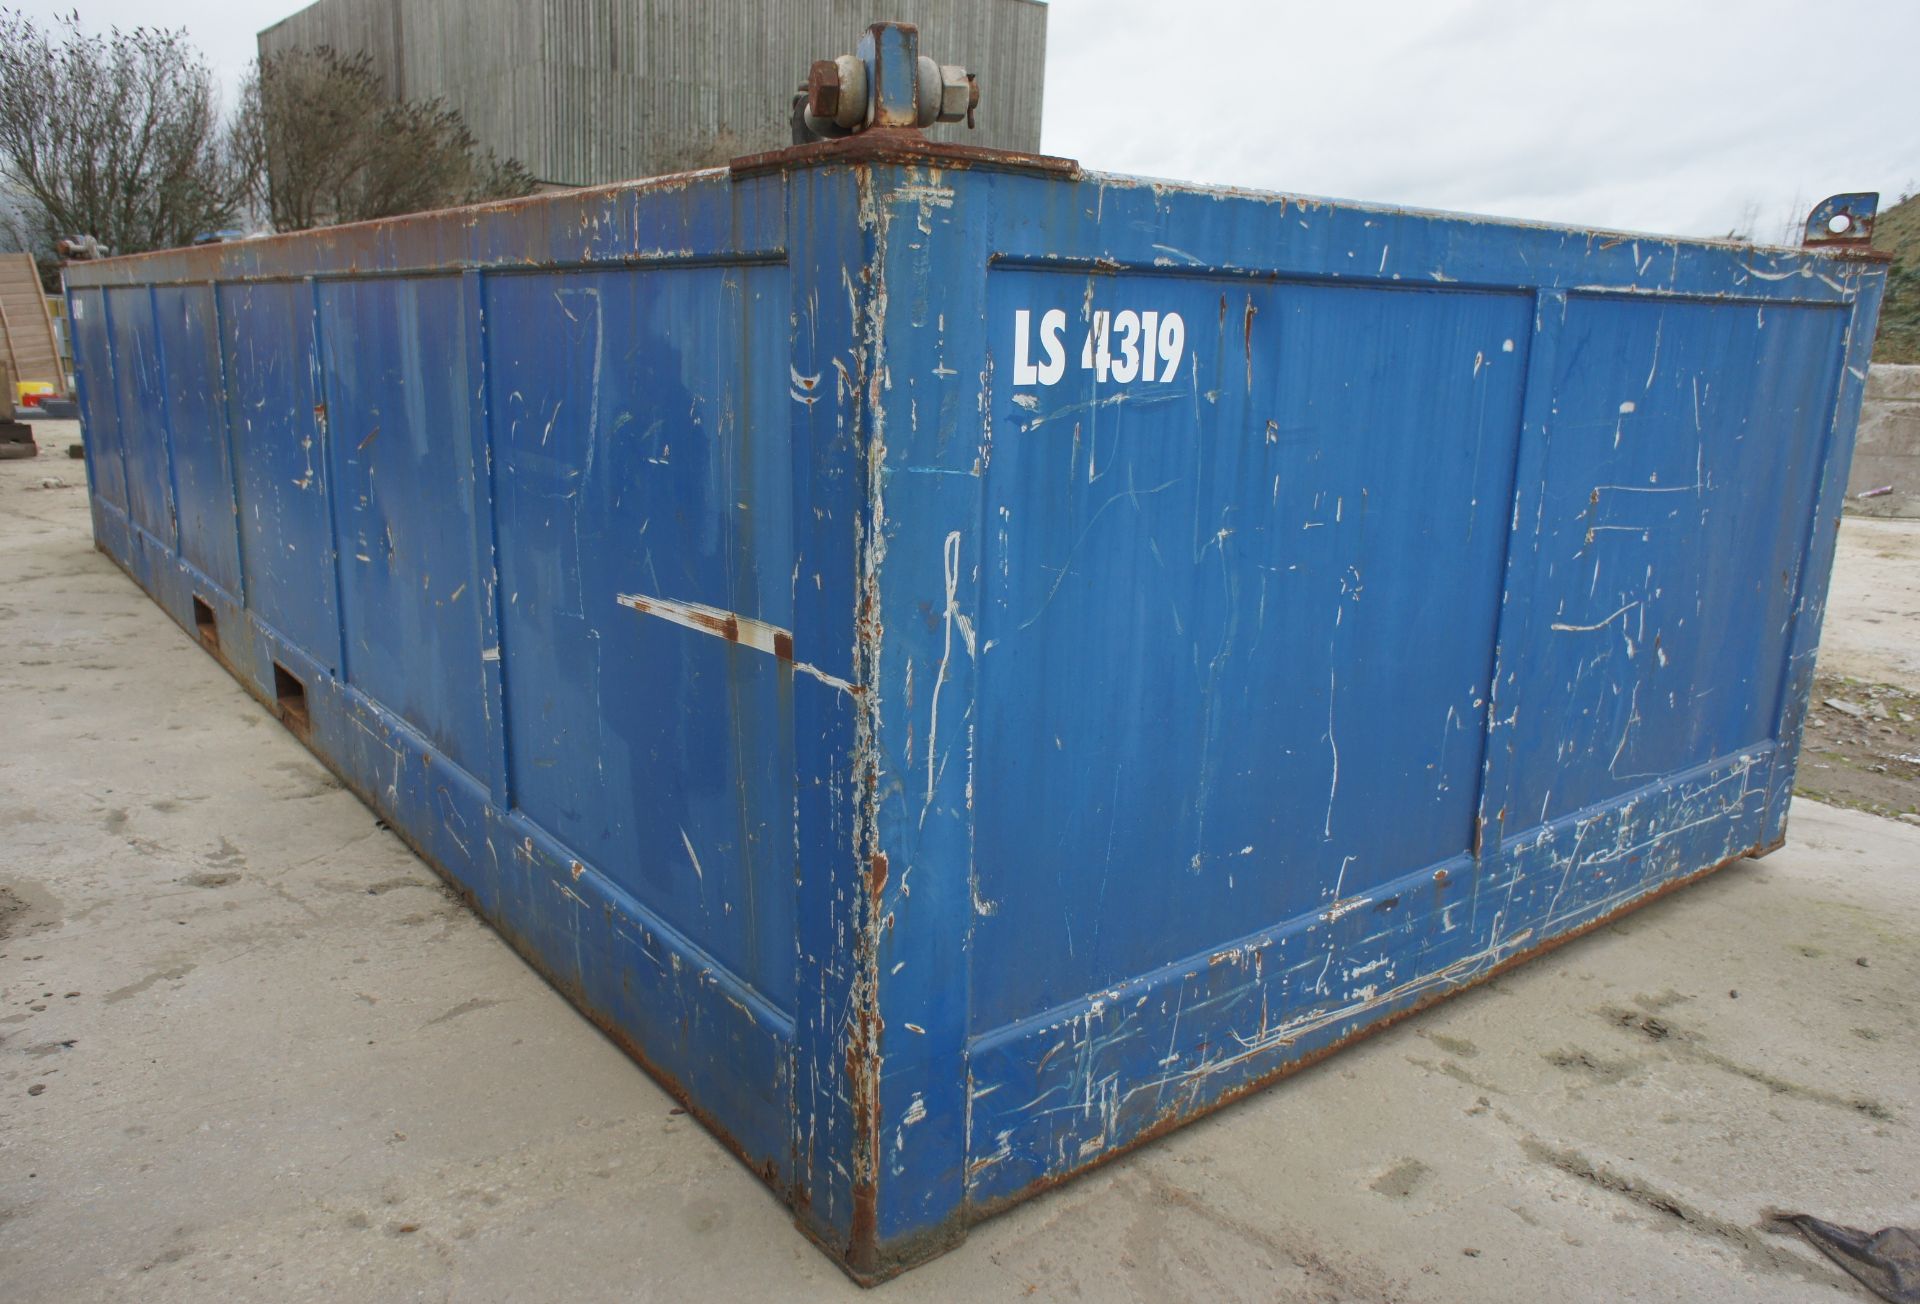 * Transit Containers Ltd, Offshore half height container, 20ft, MGW 15000kgs. Please note this lot